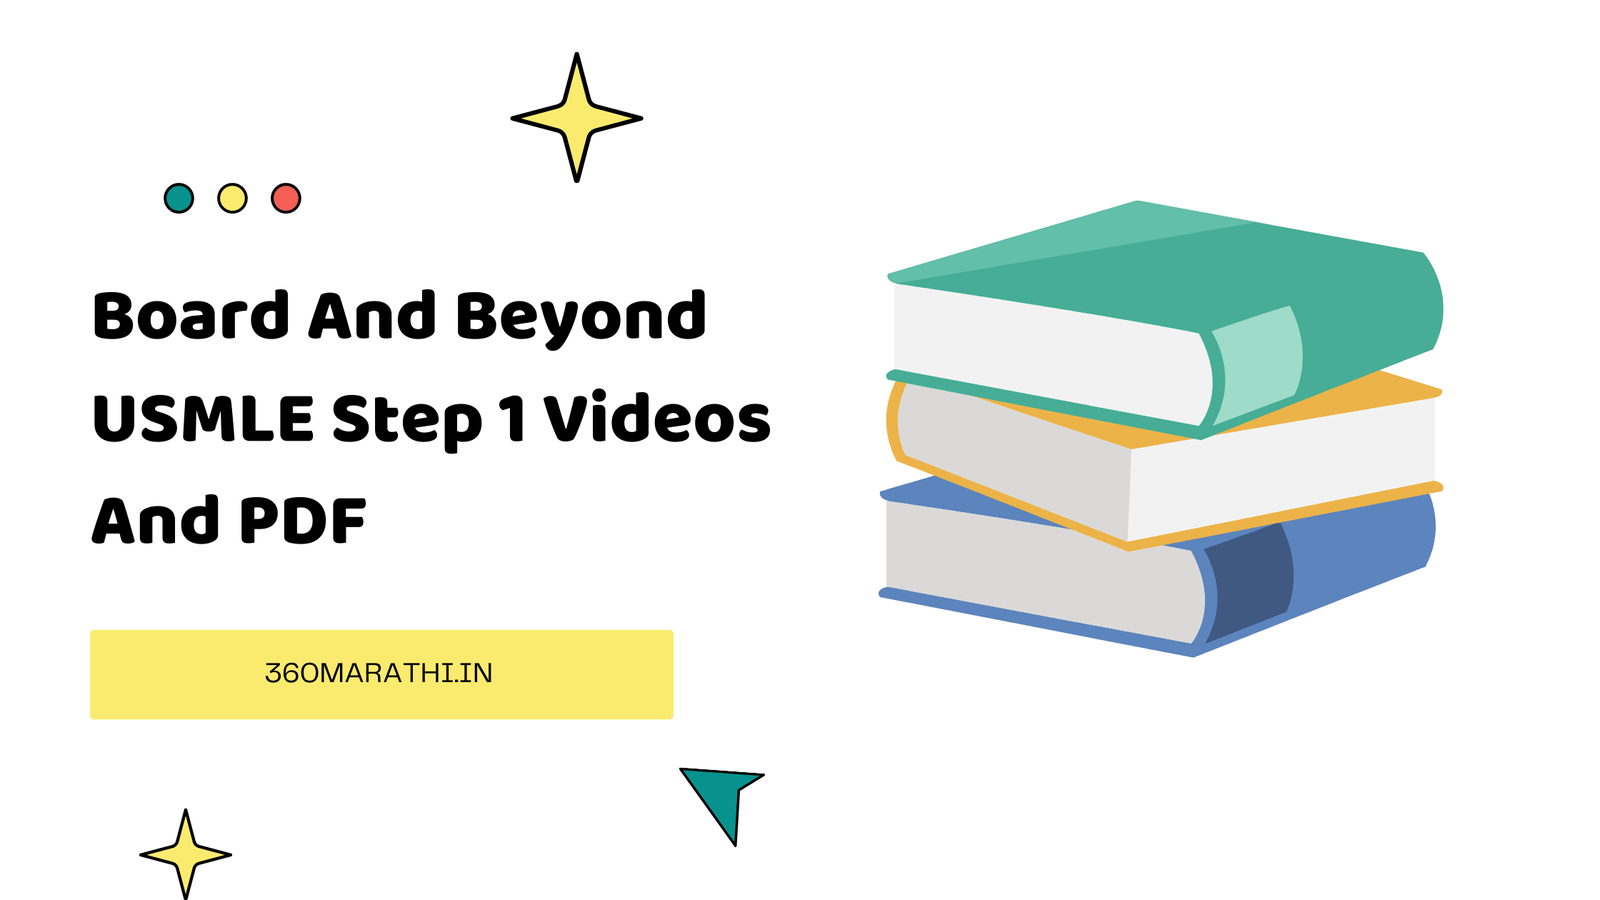 Board And Beyond USMLE Step 1 Videos And PDF